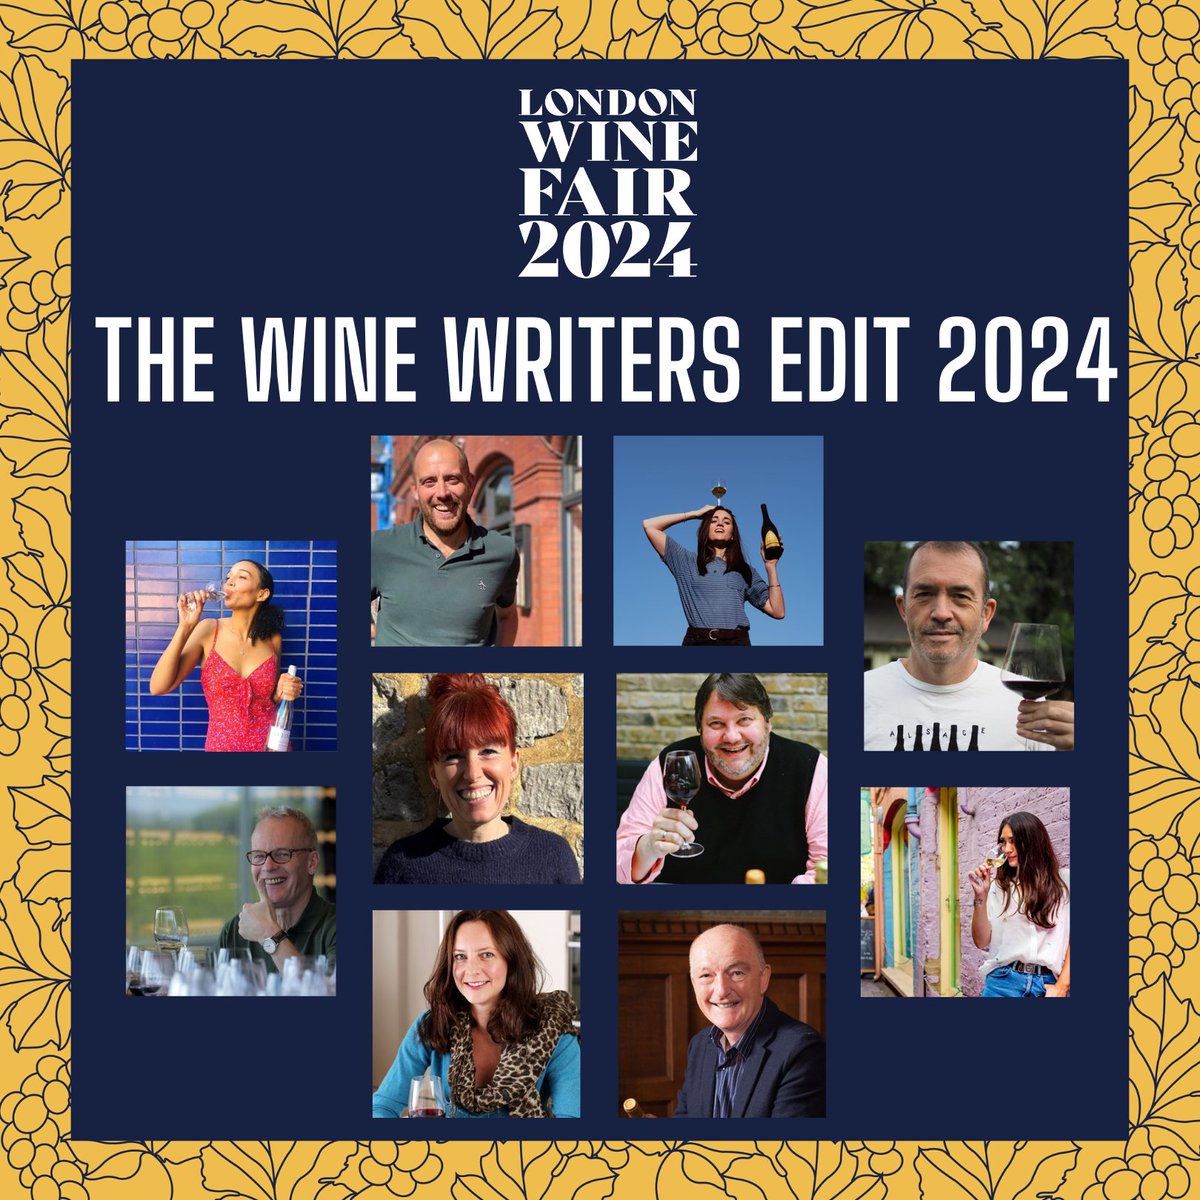 We are delighted to share the 'Wine Writers Edit 2024' - A list of the top 30 wines to look out for at the #LWF24, handpicked by 10 of the UK's leading wine writers. To browse the shortlist, visit: londonwinefair.com/visit/the-wine…